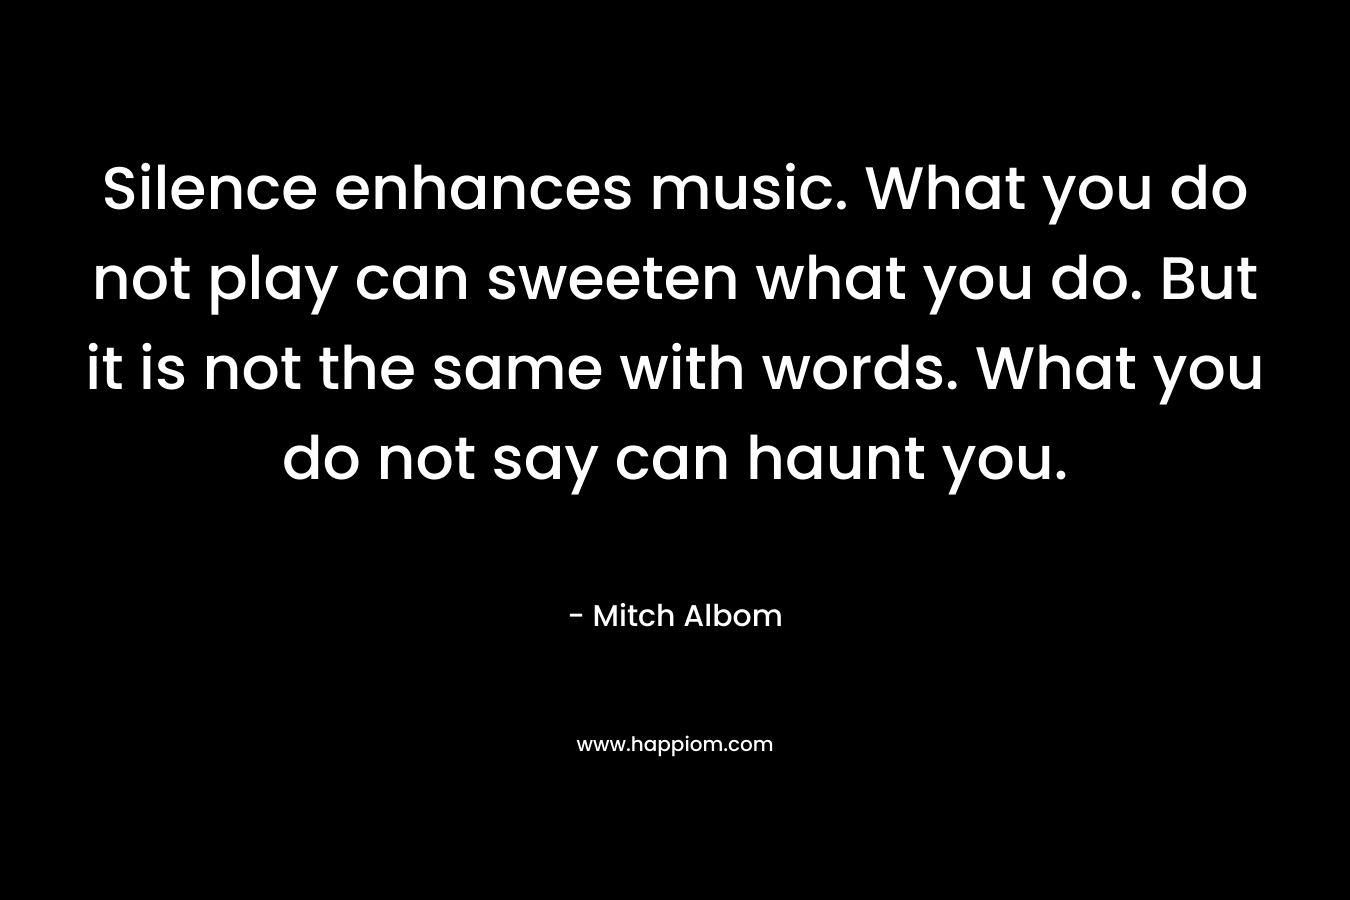 Silence enhances music. What you do not play can sweeten what you do. But it is not the same with words. What you do not say can haunt you.